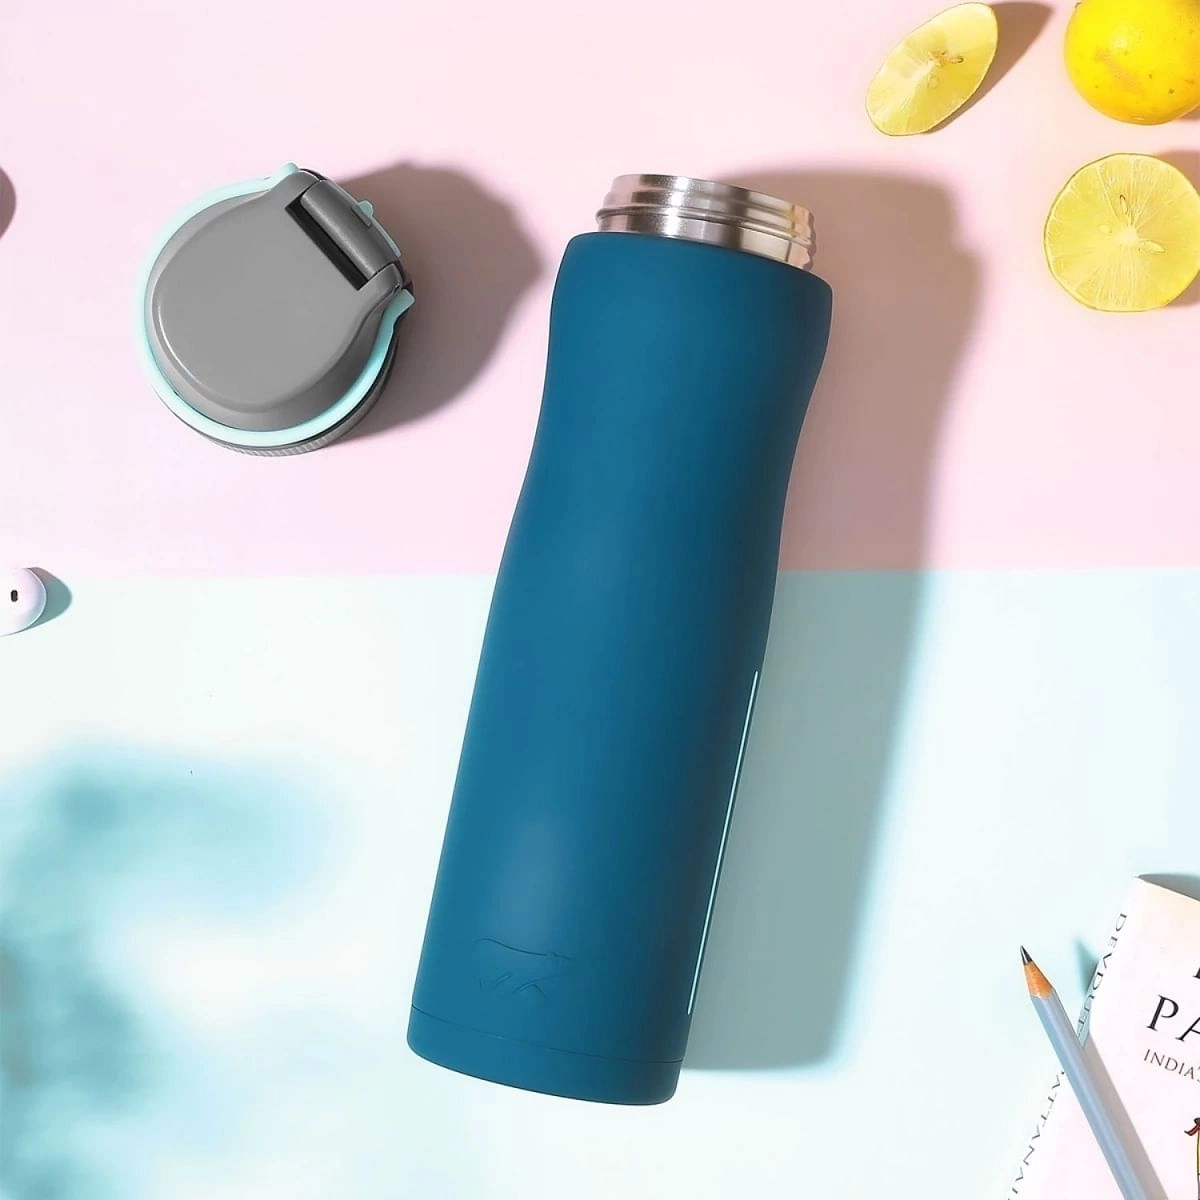 Headway Oslo Vacuum Insulated Stainless Steel Bottle Maridian Blue 750 ML Blue 10Y+